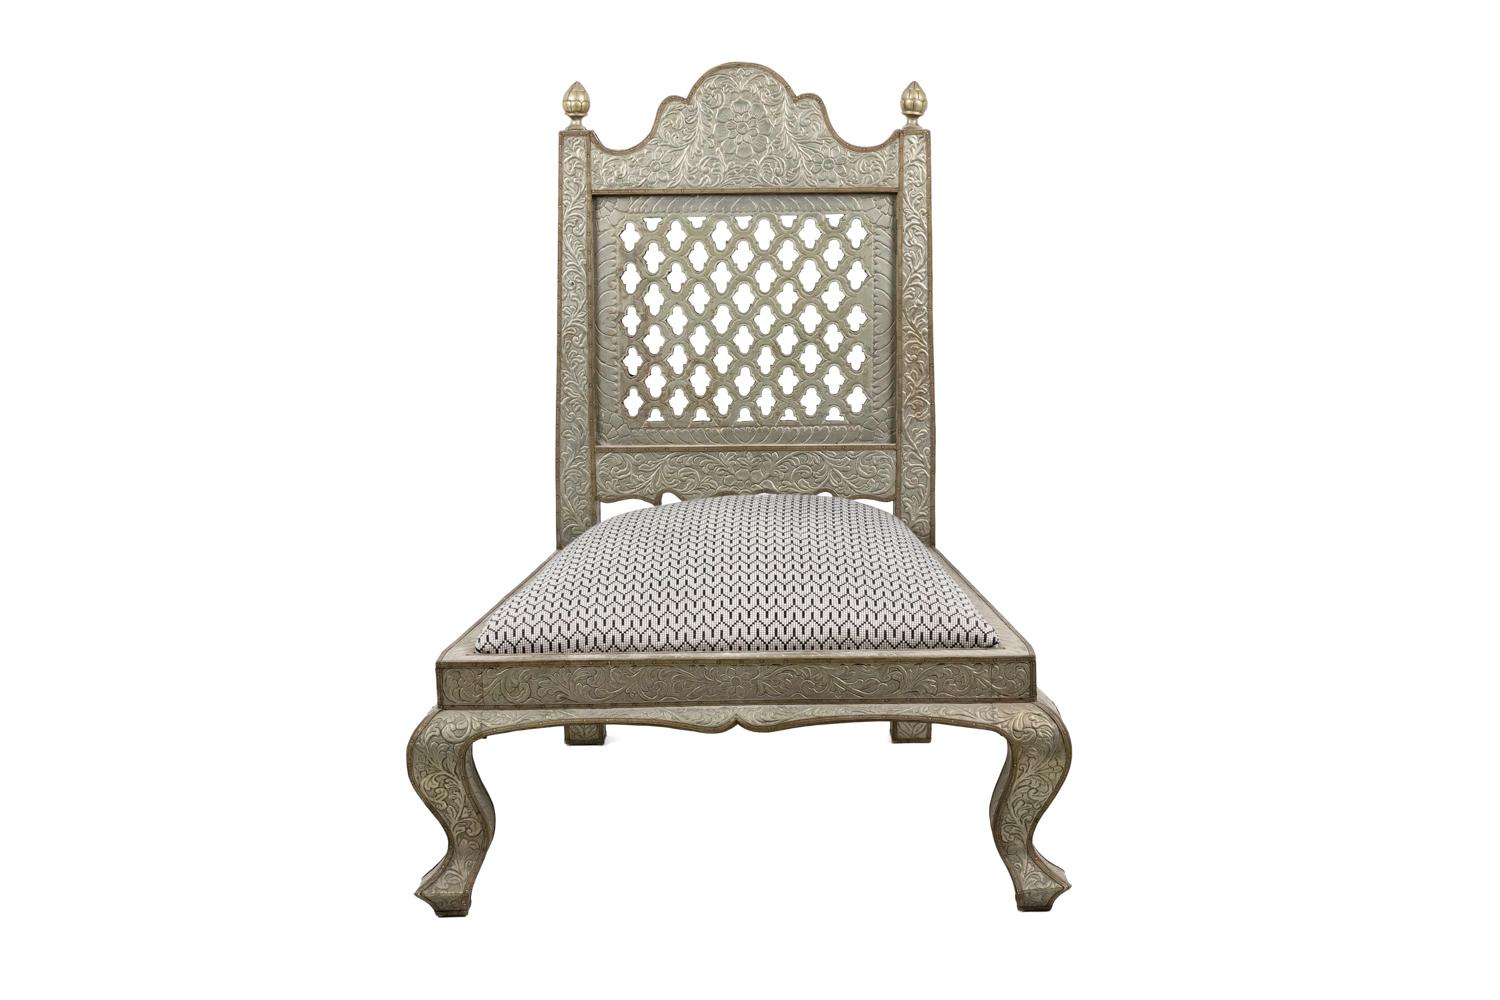 Pair of Moorish style fireside chairs in embossed metal on wood, standing on two straight squared back legs and two curved front legs.
Openwork back with a trilobed top, flanked uprights topped with pinecones.
Embossed decor of interlaced plants,